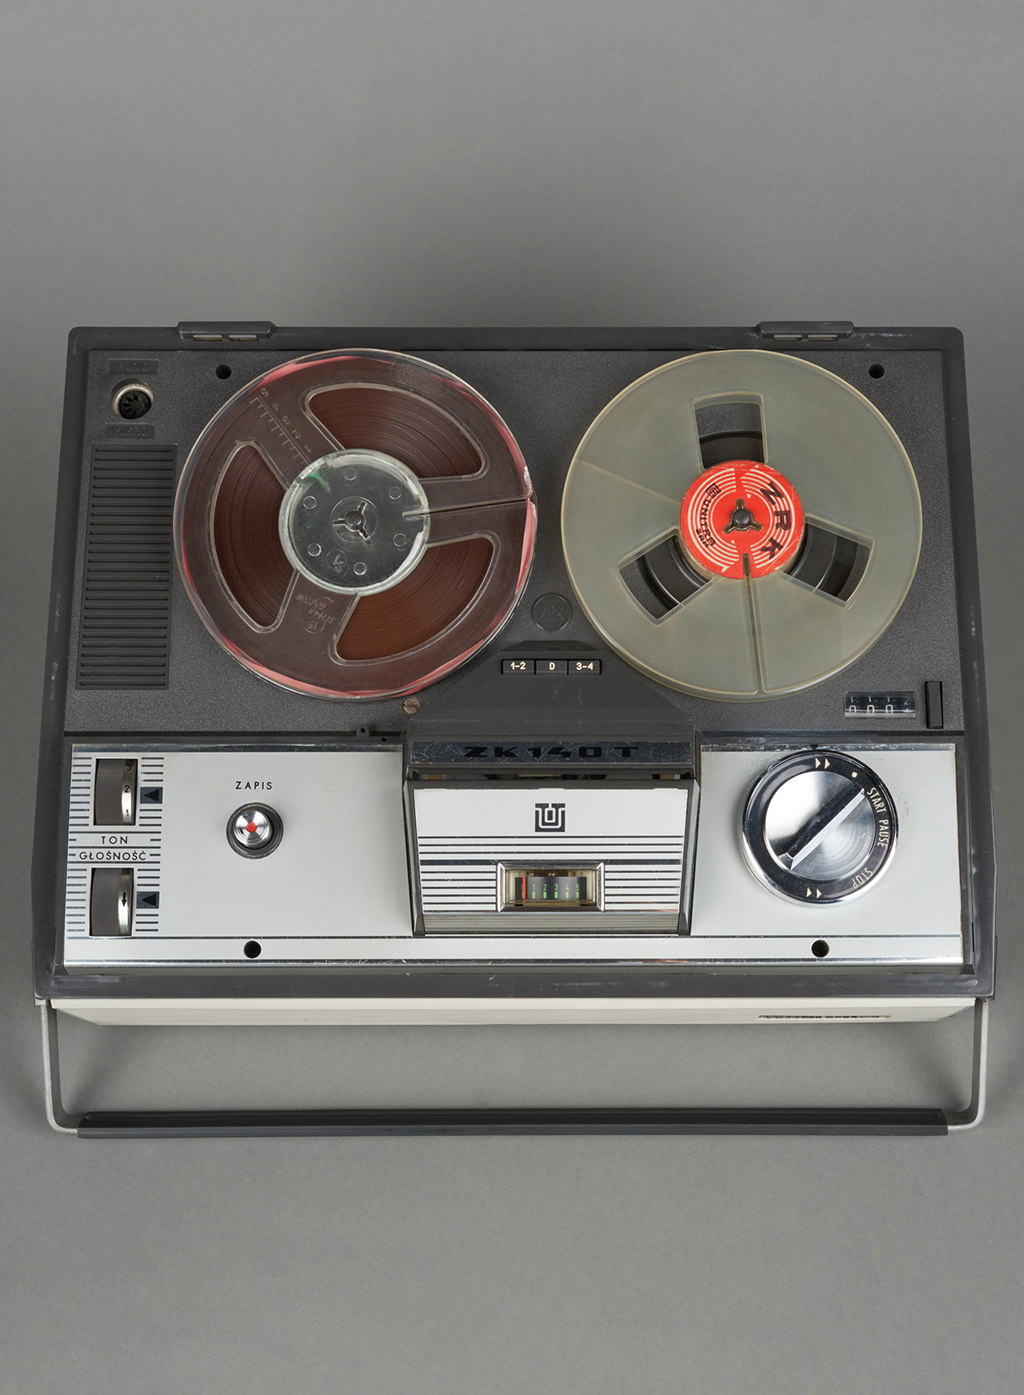 ZK-140 T reel-to-reel tape recorder